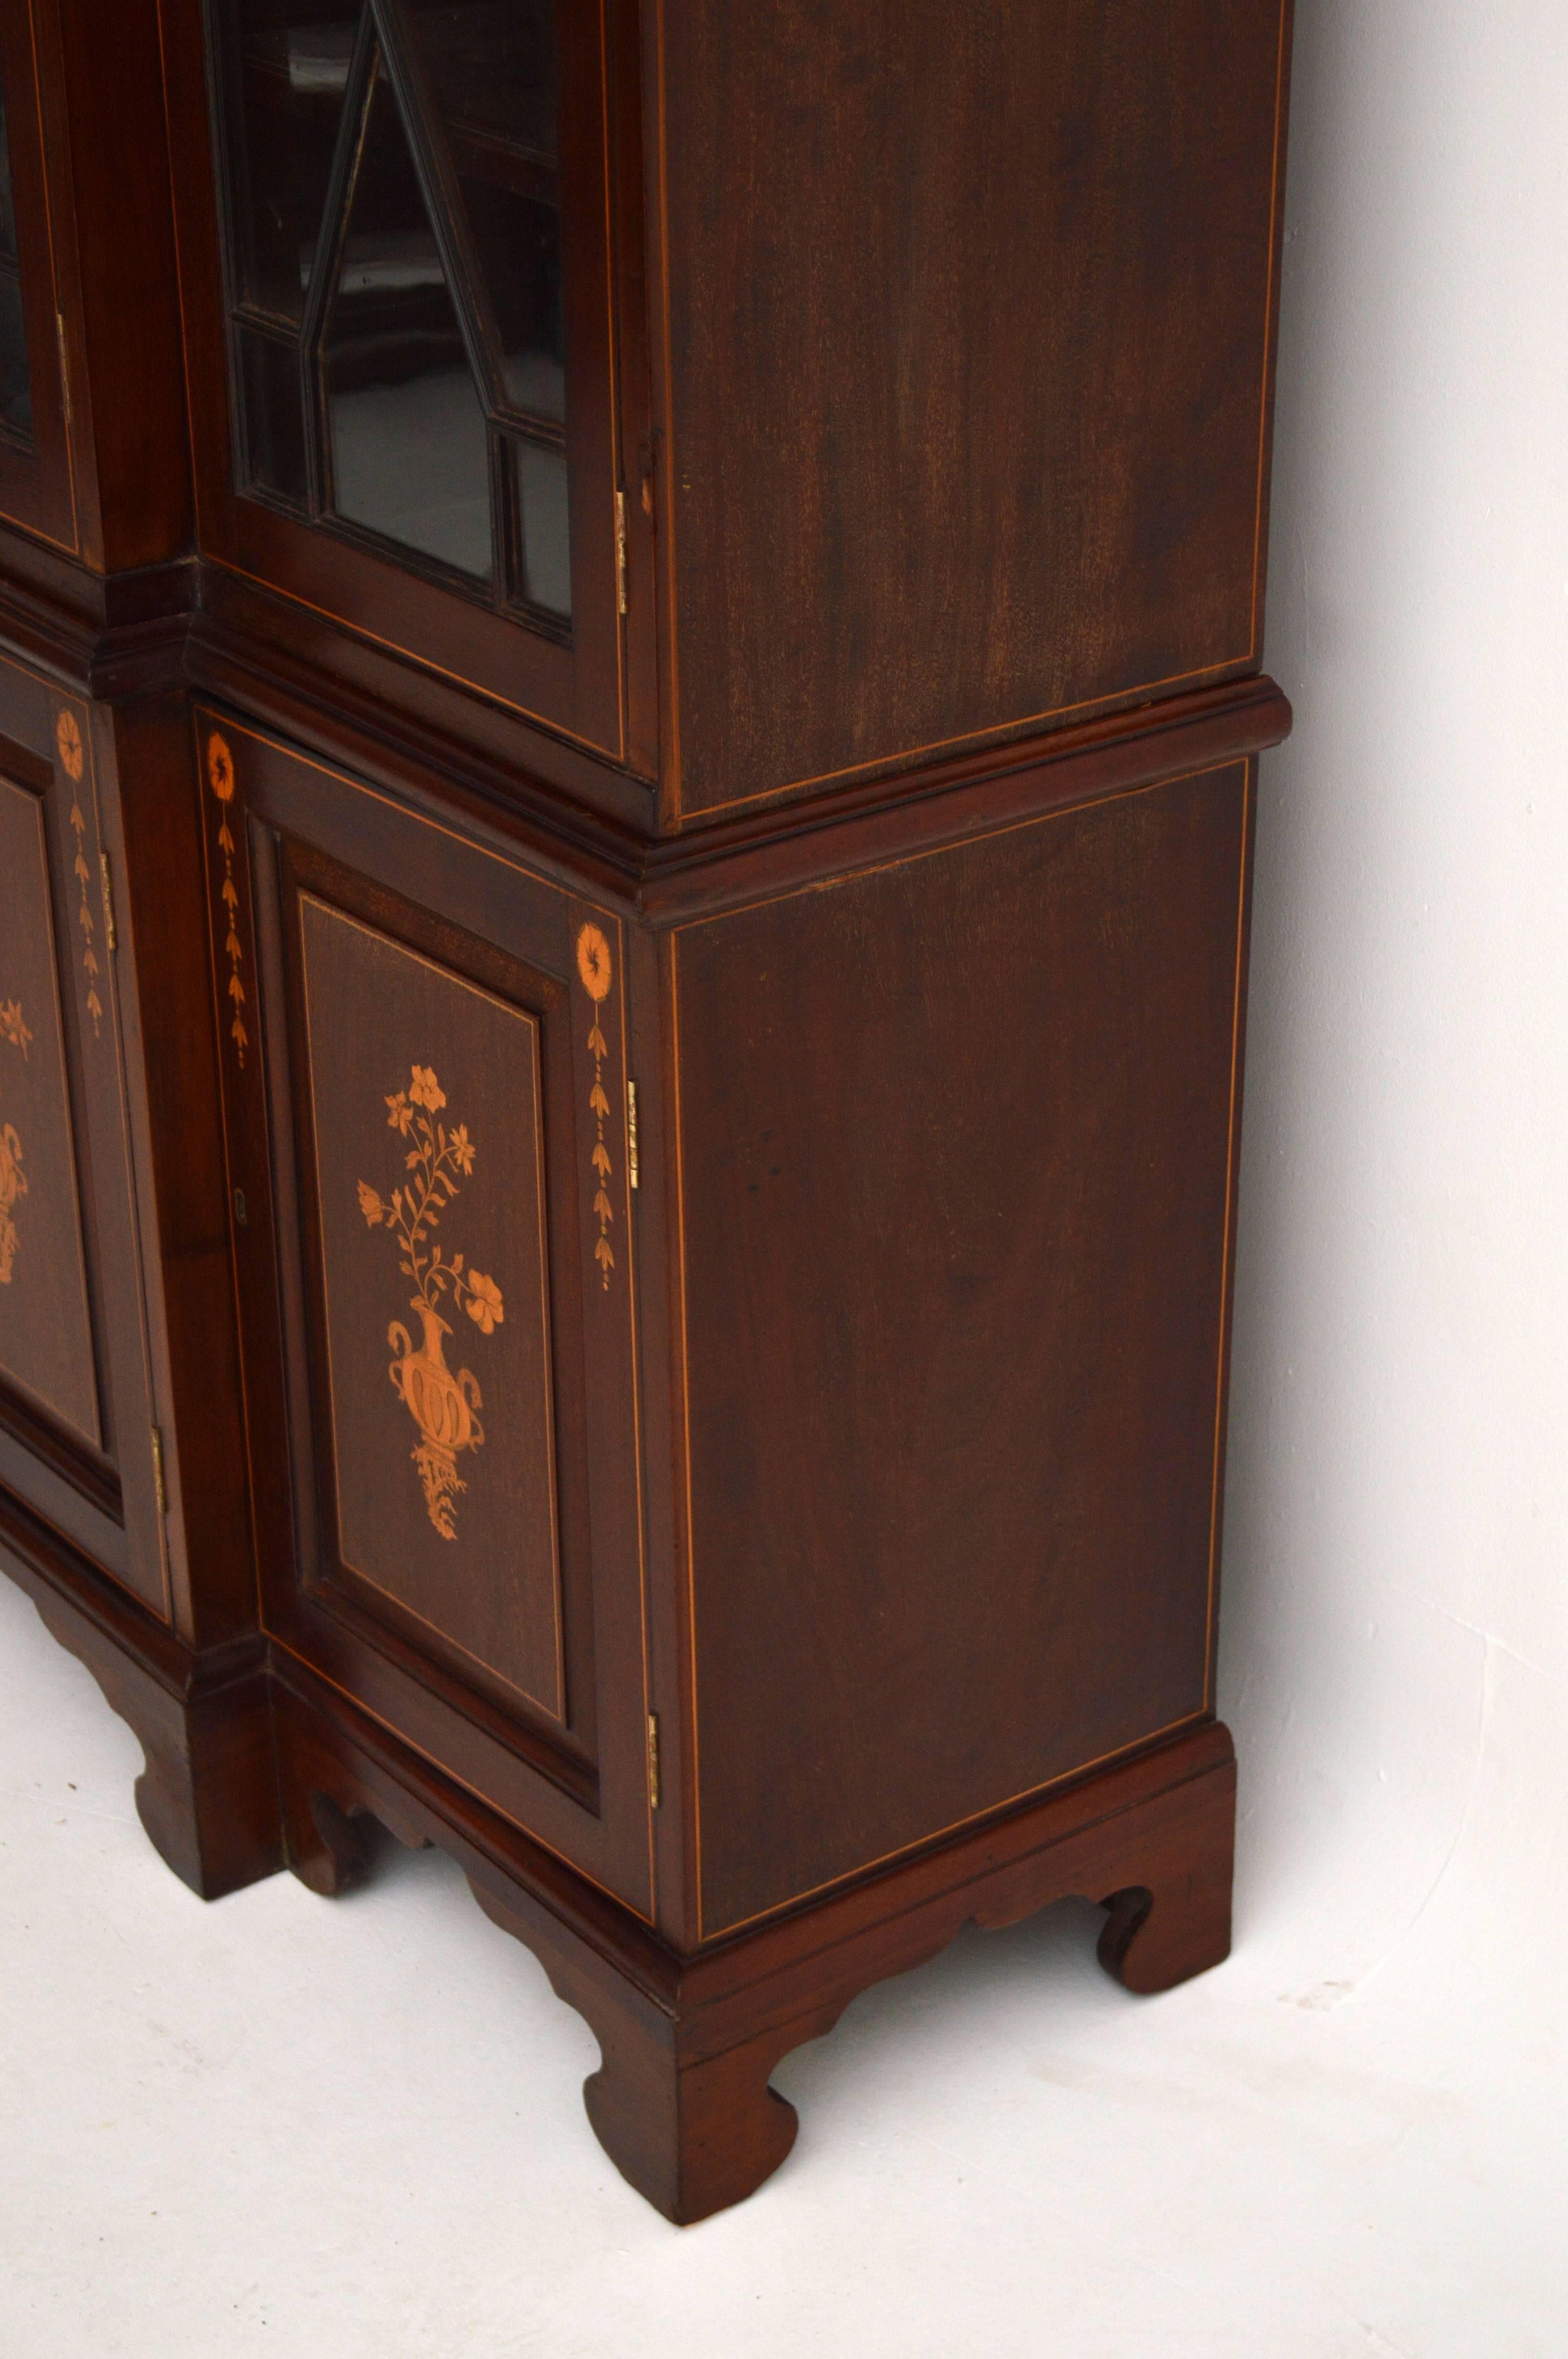 Antique Mahogany Breakfront Bookcase with Stunning Satinwood Inlays 3